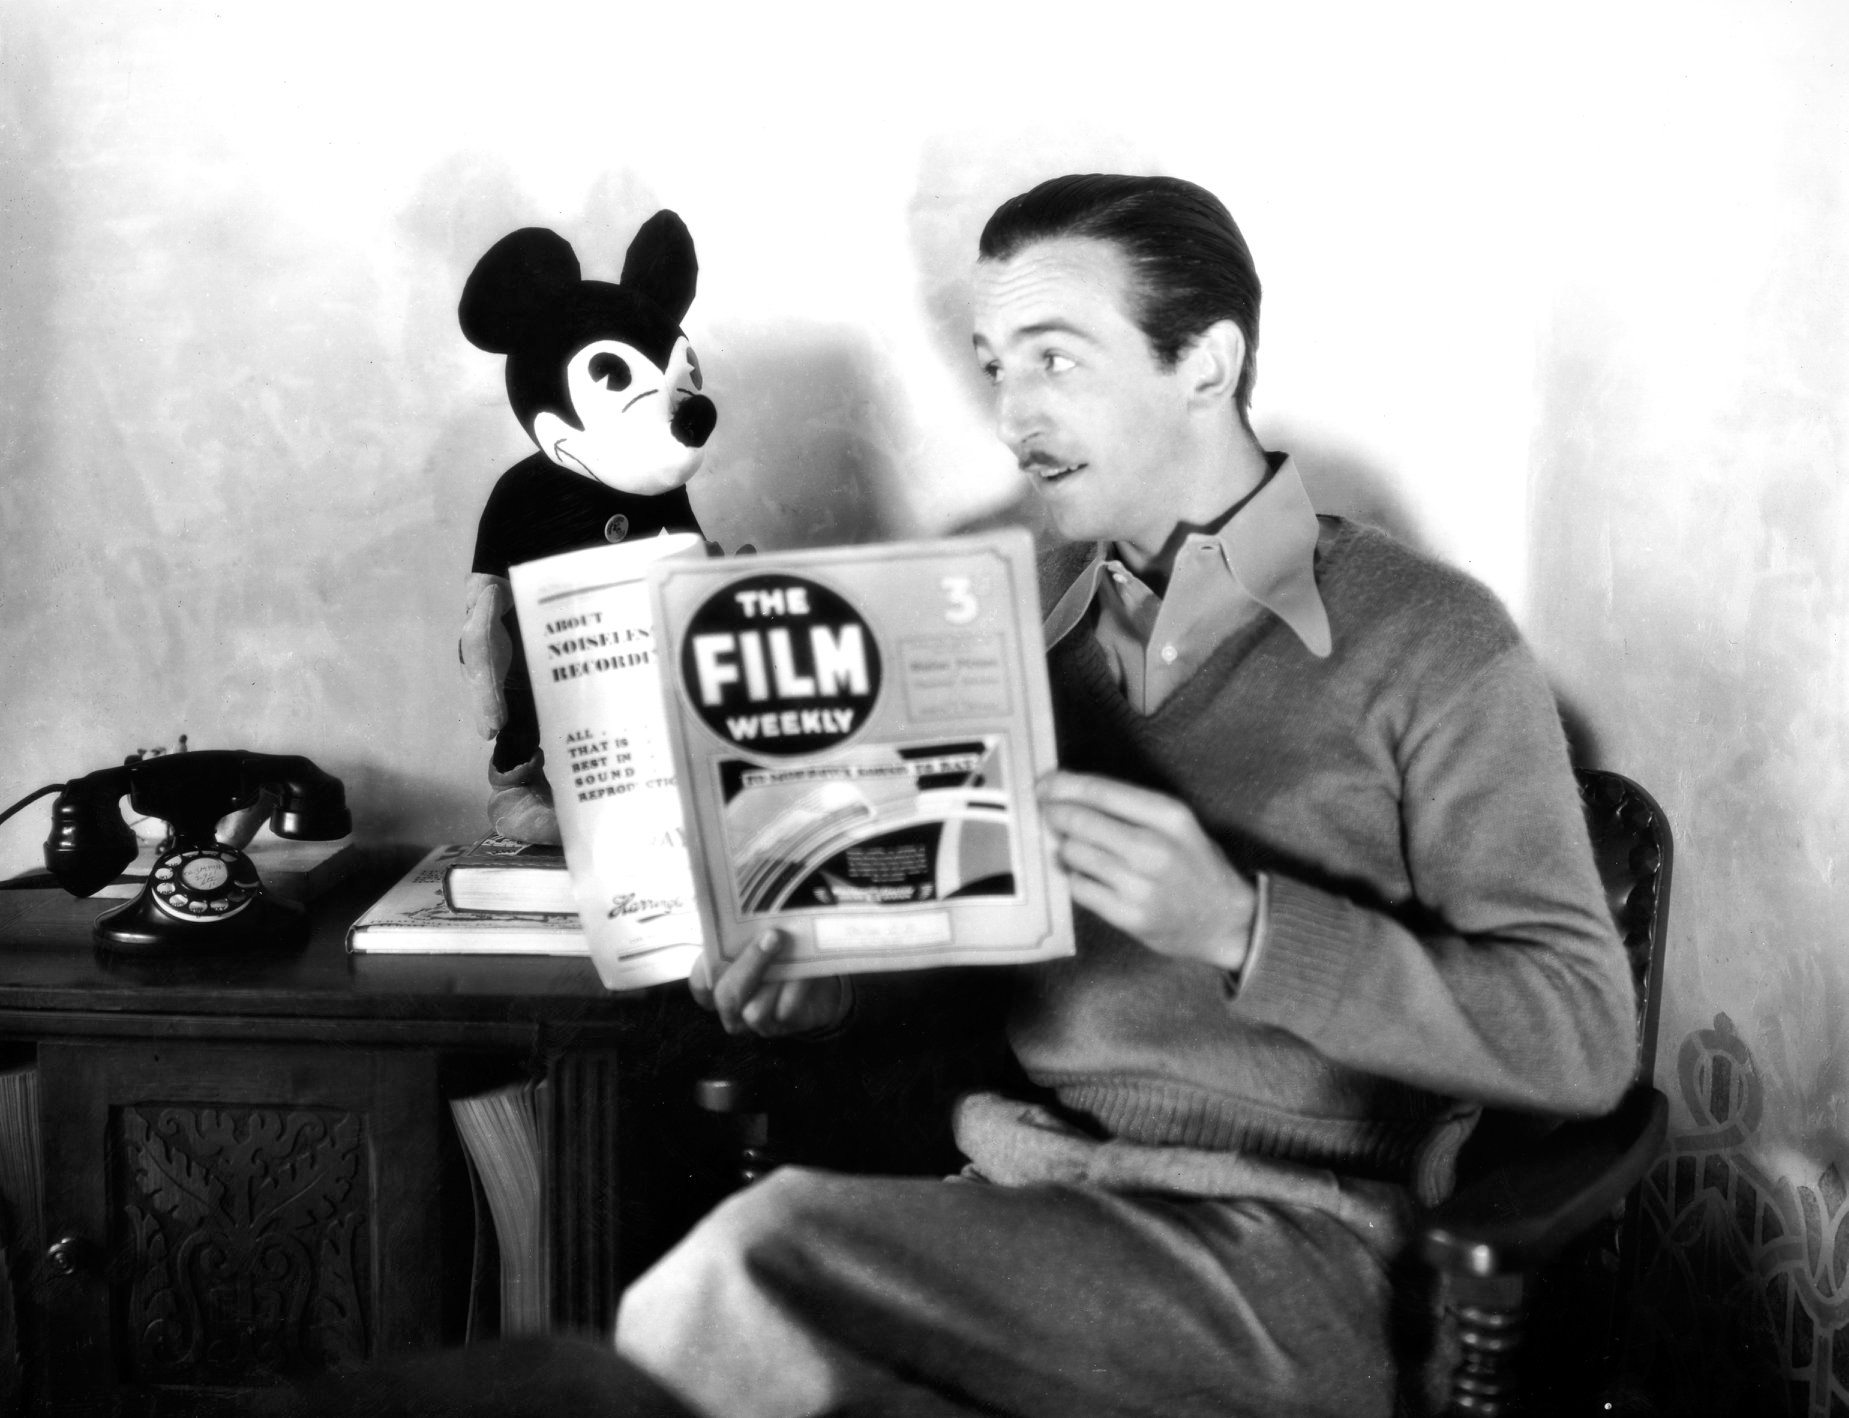 Walter Disney with a stuffed animal he created, Mickey Mouse (Photo: Facebook / The Walt Disney Family Museum @WDFMuseum)